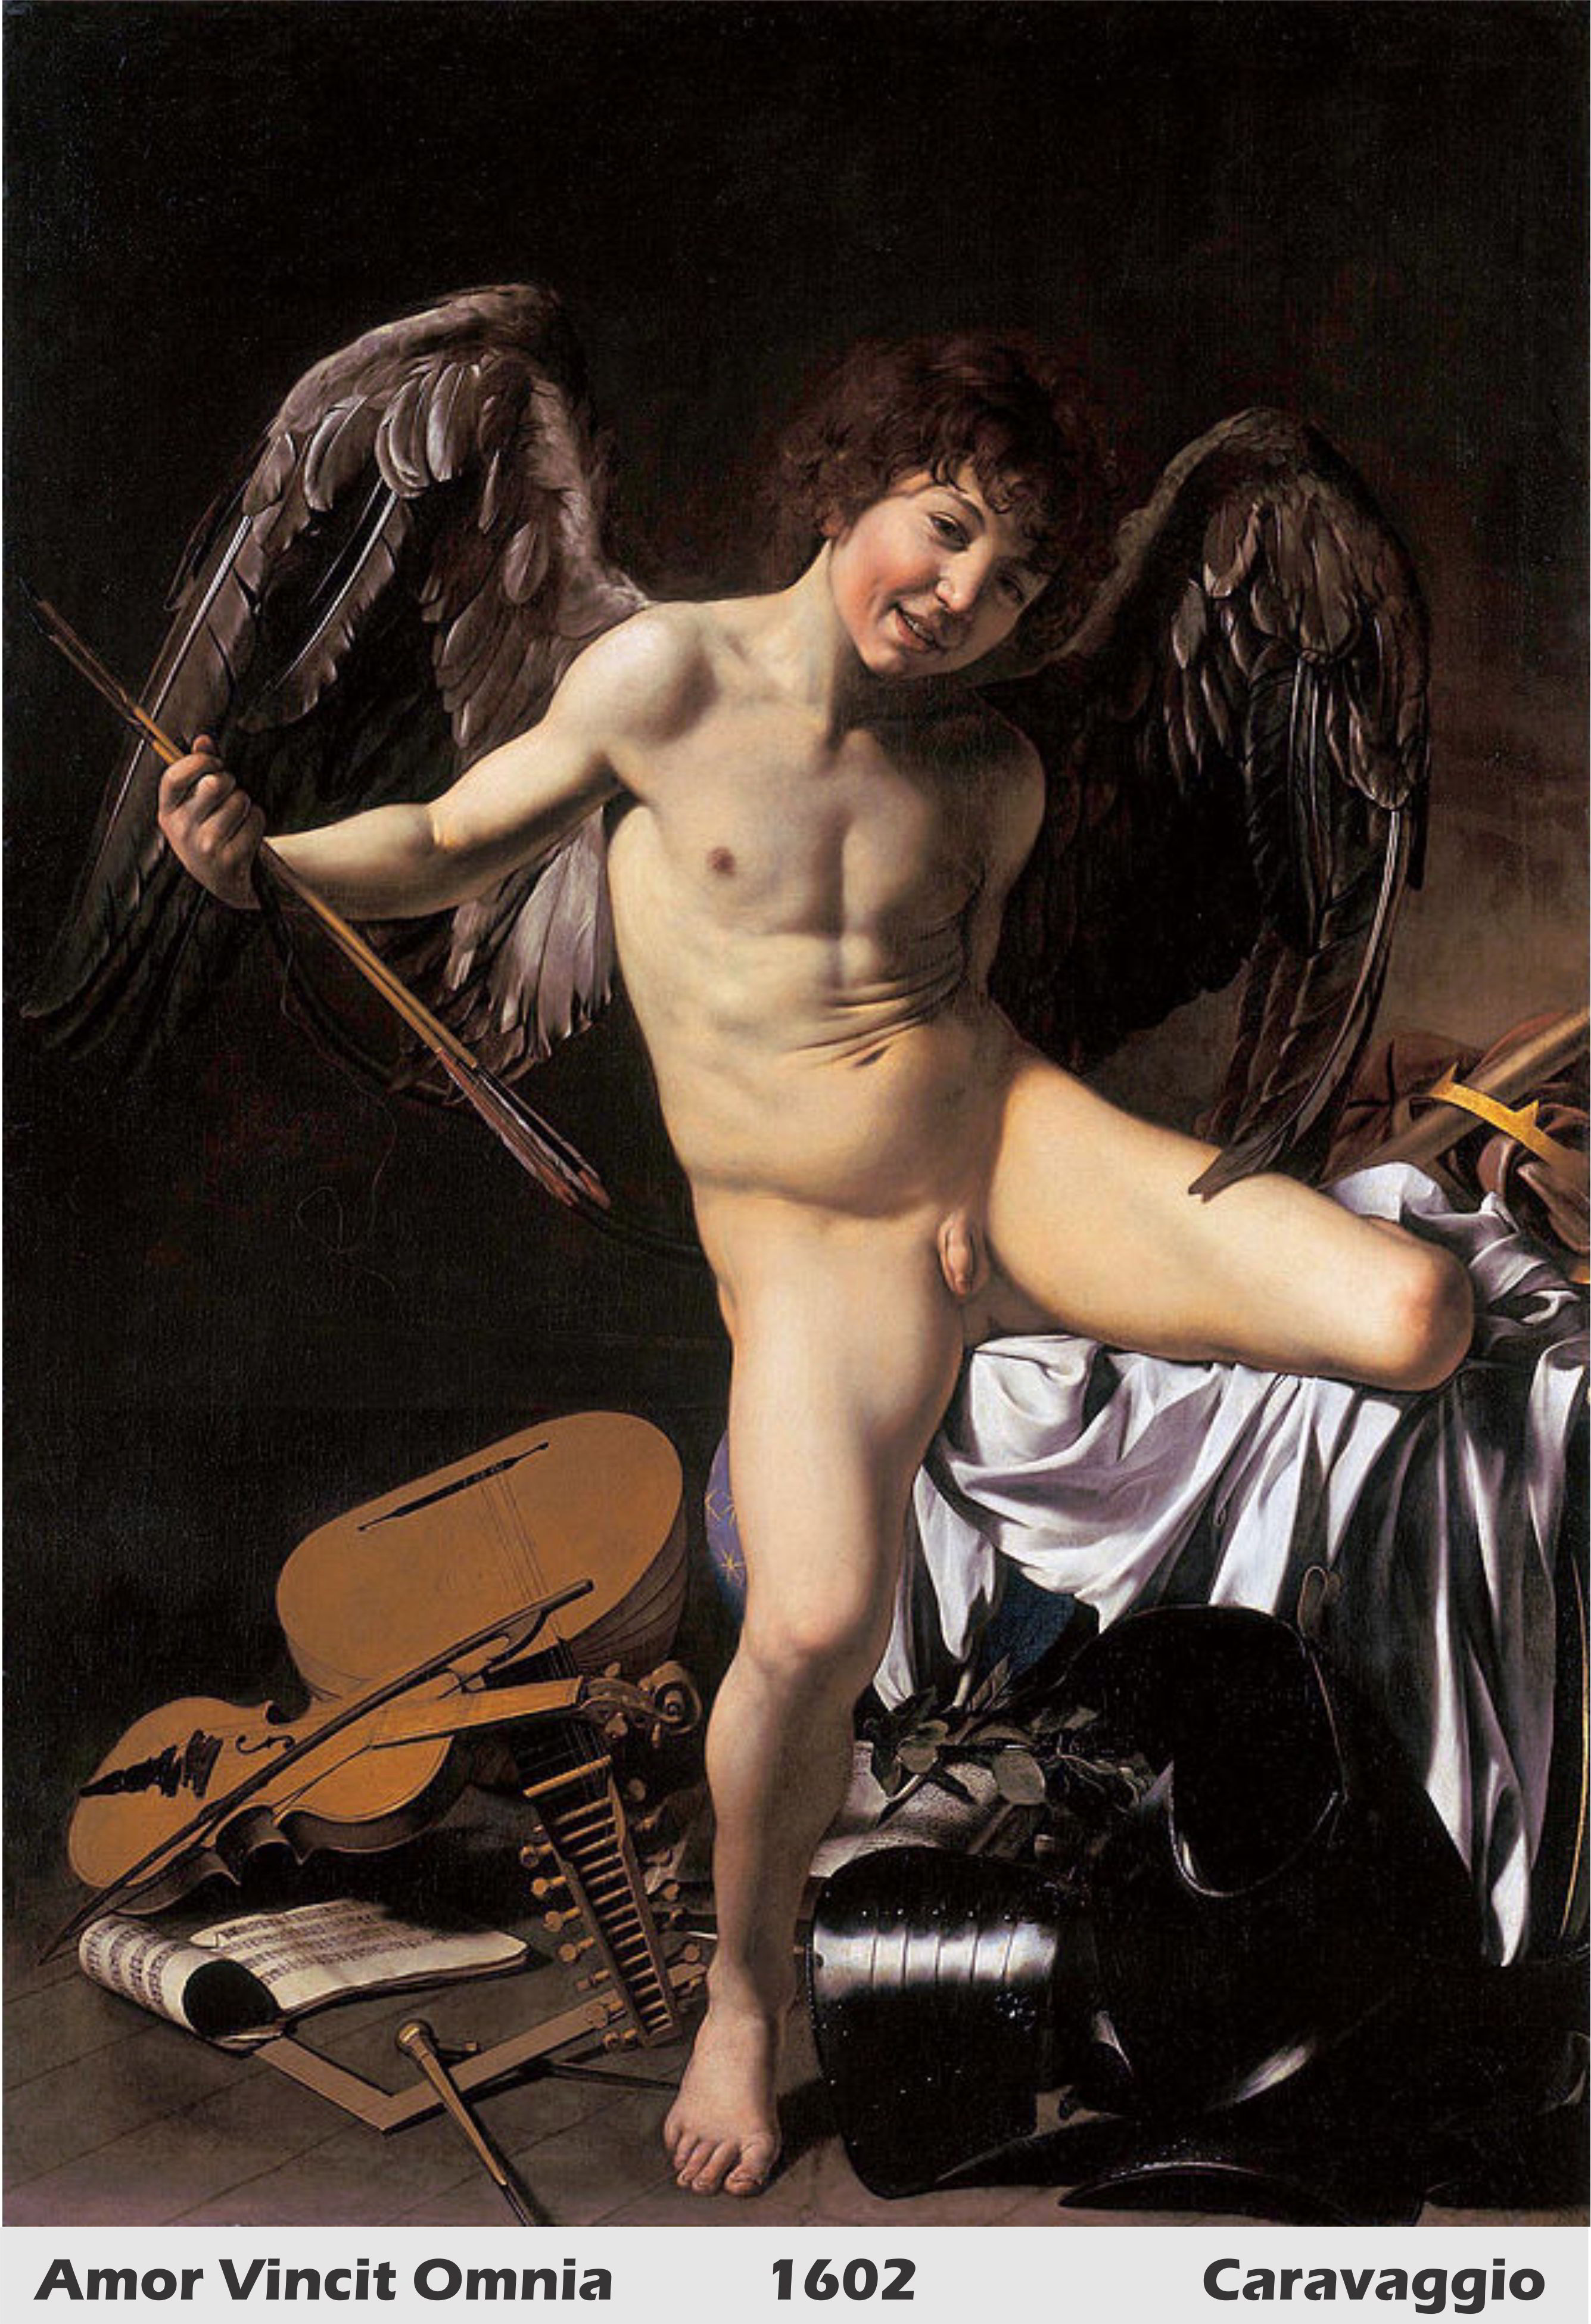 Amor Vincit Omnia by Caravaggio- History Painting